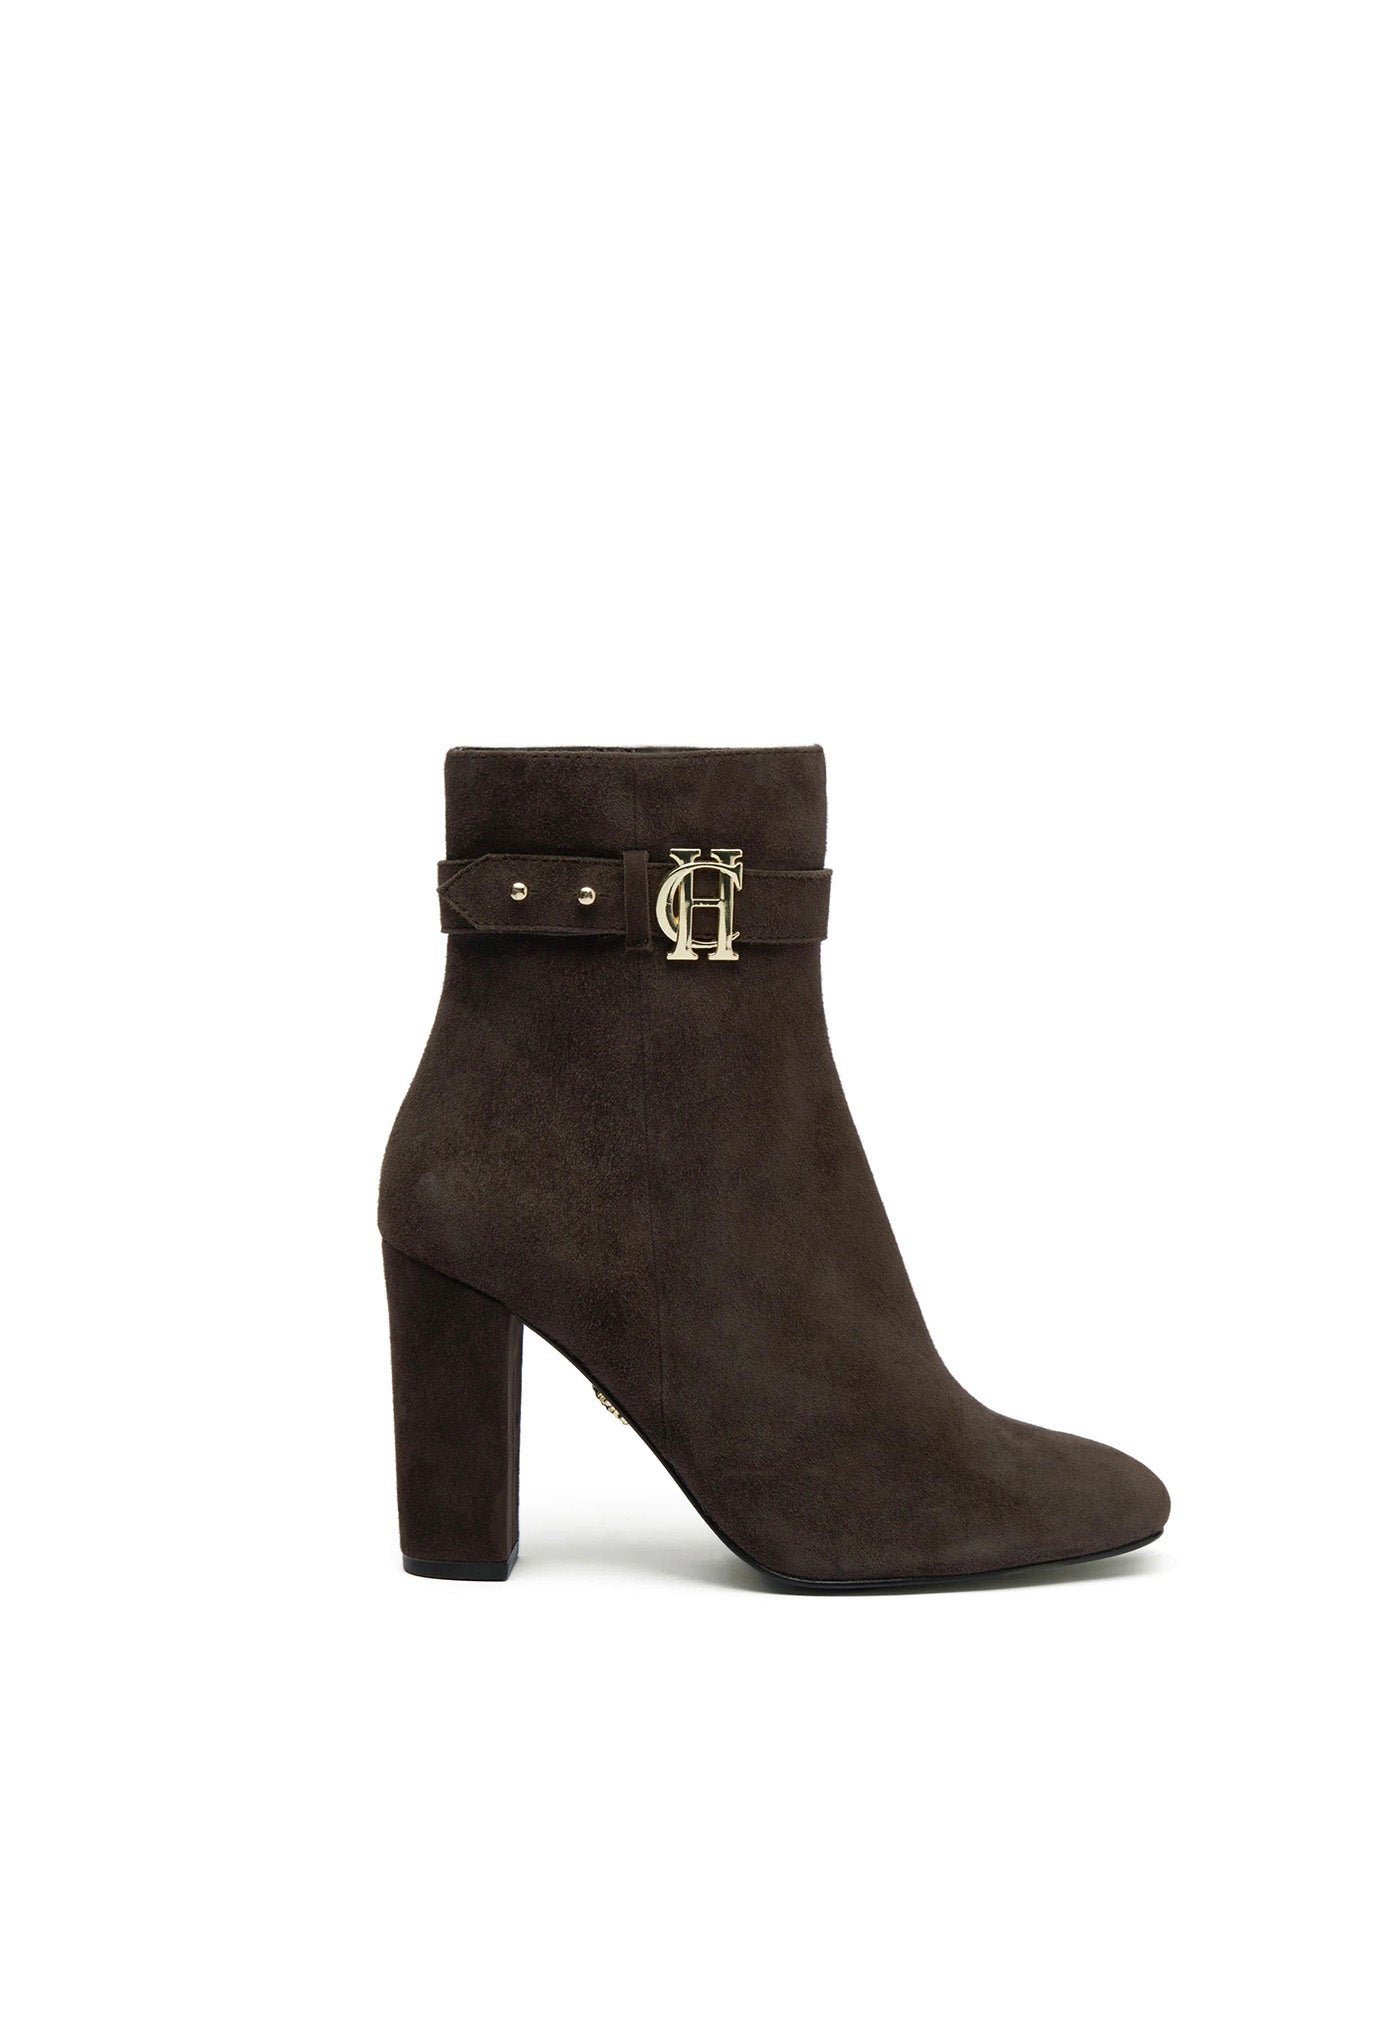 Mayfair Suede Ankle Boot - Chocolate sold by Angel Divine